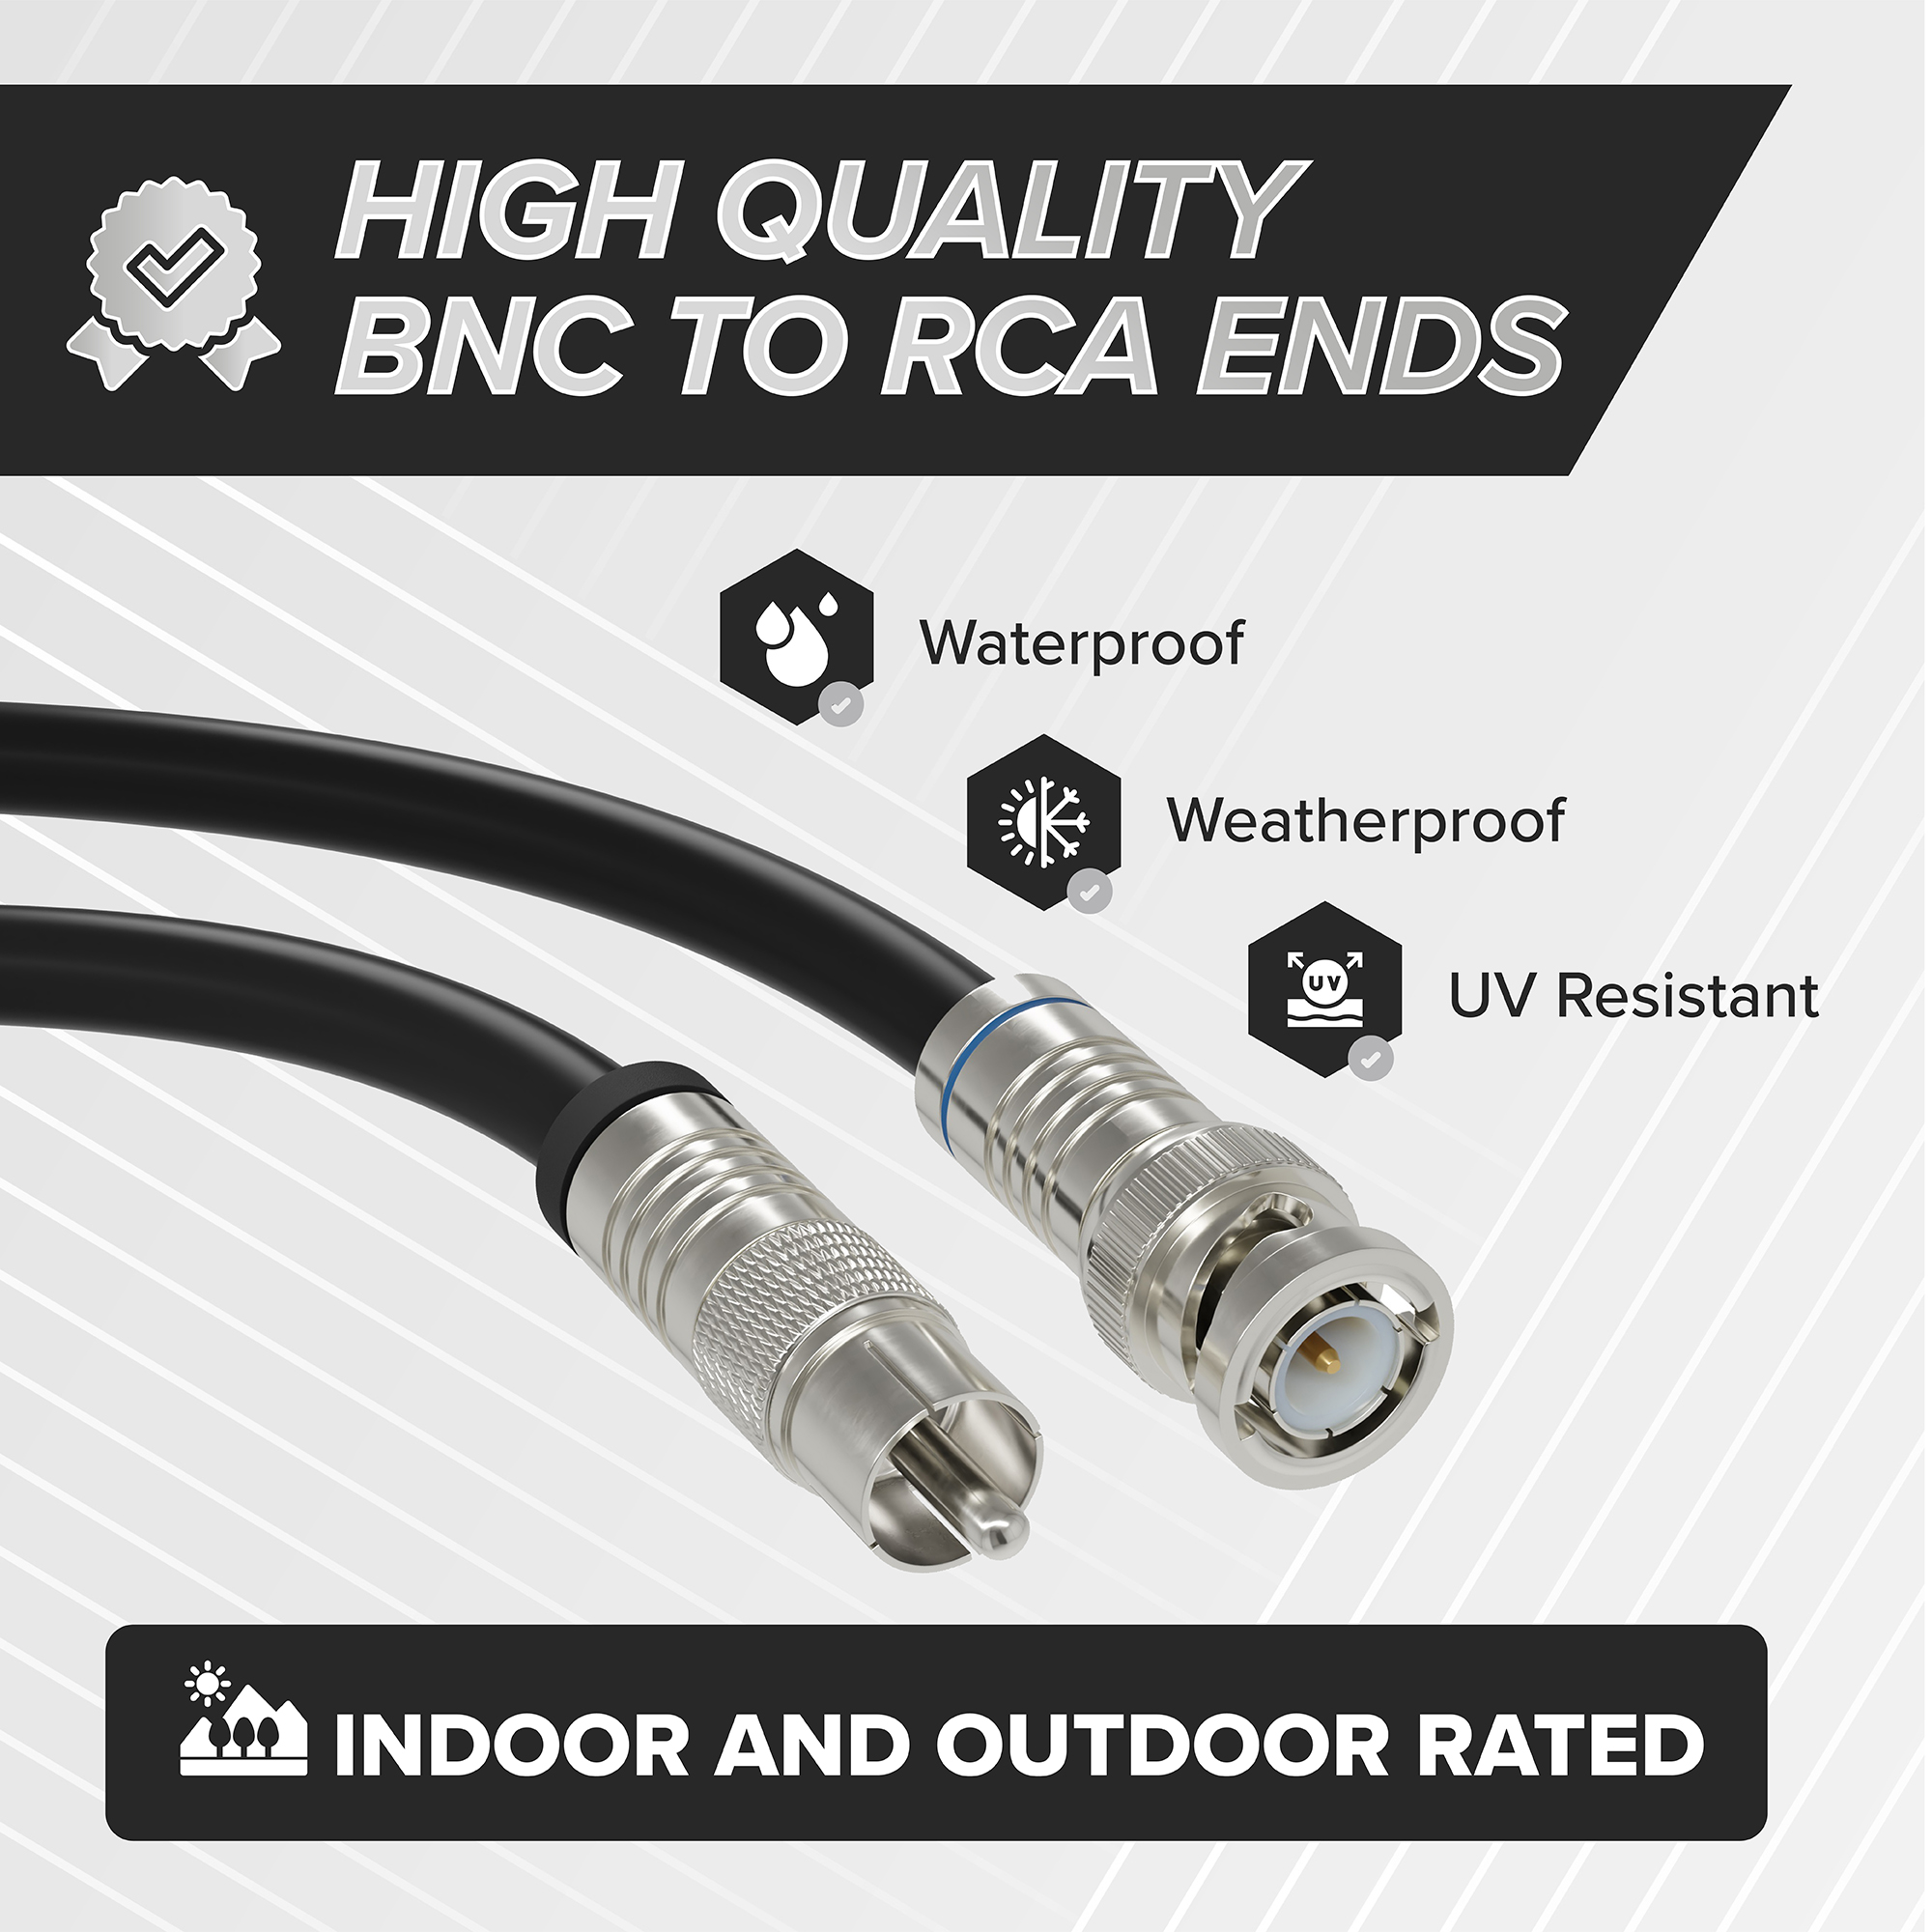 Black, 25 ft BNC to RCA RG6 Cable - Professional Grade - Male BNC to Male RCA Cable  - BNC Cable - 75 Ohm Coaxial, 50/75 Ohm Connectors, SDI, HD-SDI, CCTV, Camera, and More - 25 Feet Long, in Black - image 3 of 10